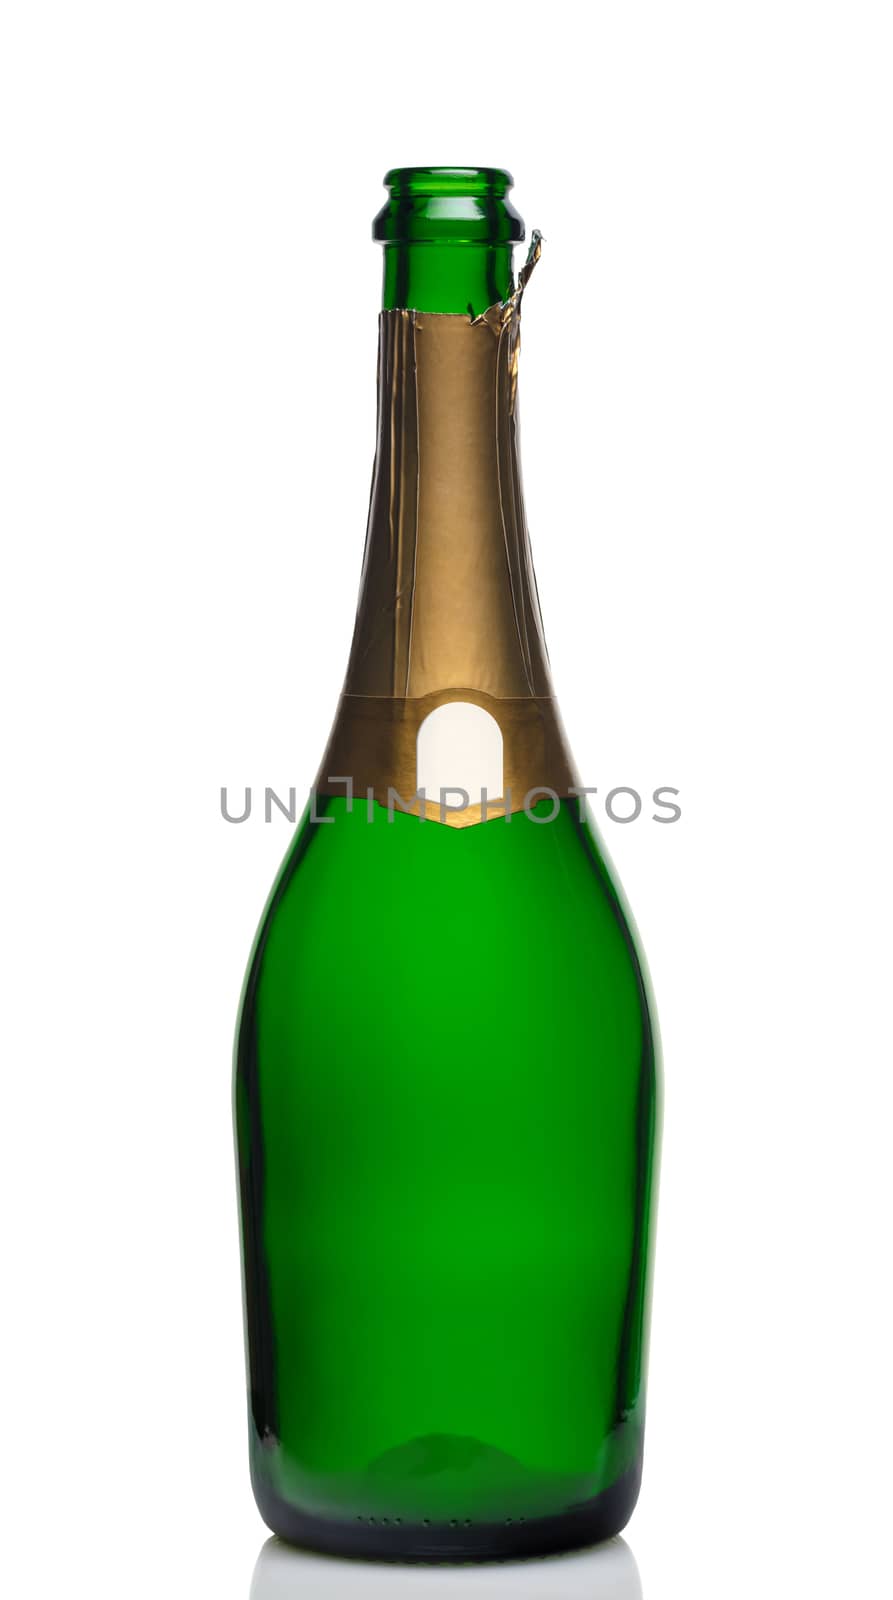 open bottle of champagne on a white background